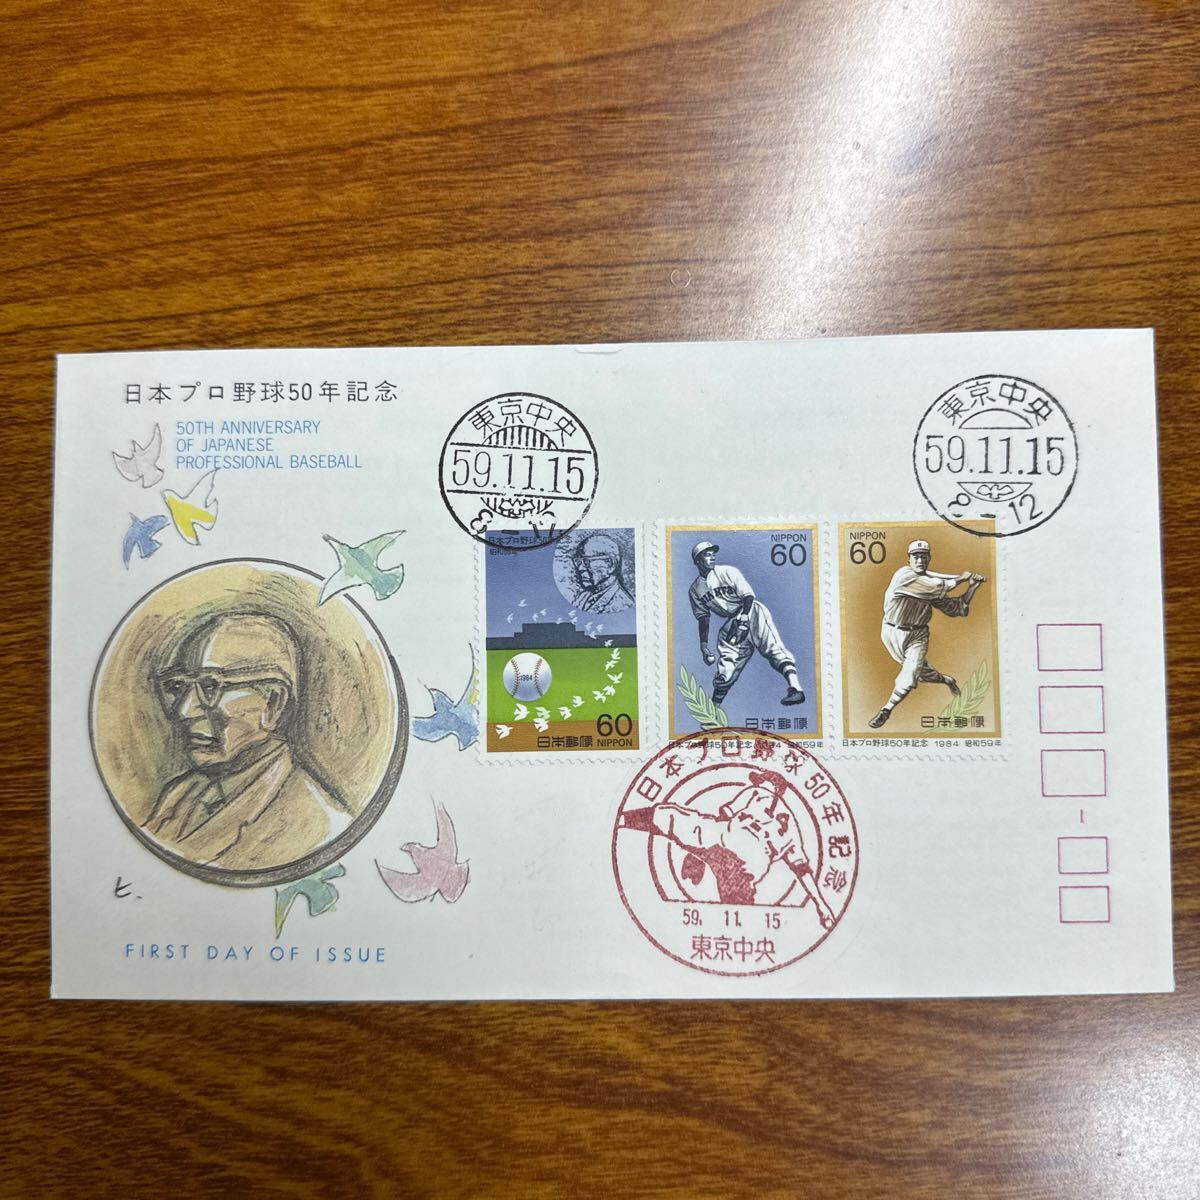  First Day Cover Japan Professional Baseball 50 year memory Showa era 59 year issue memory seal 